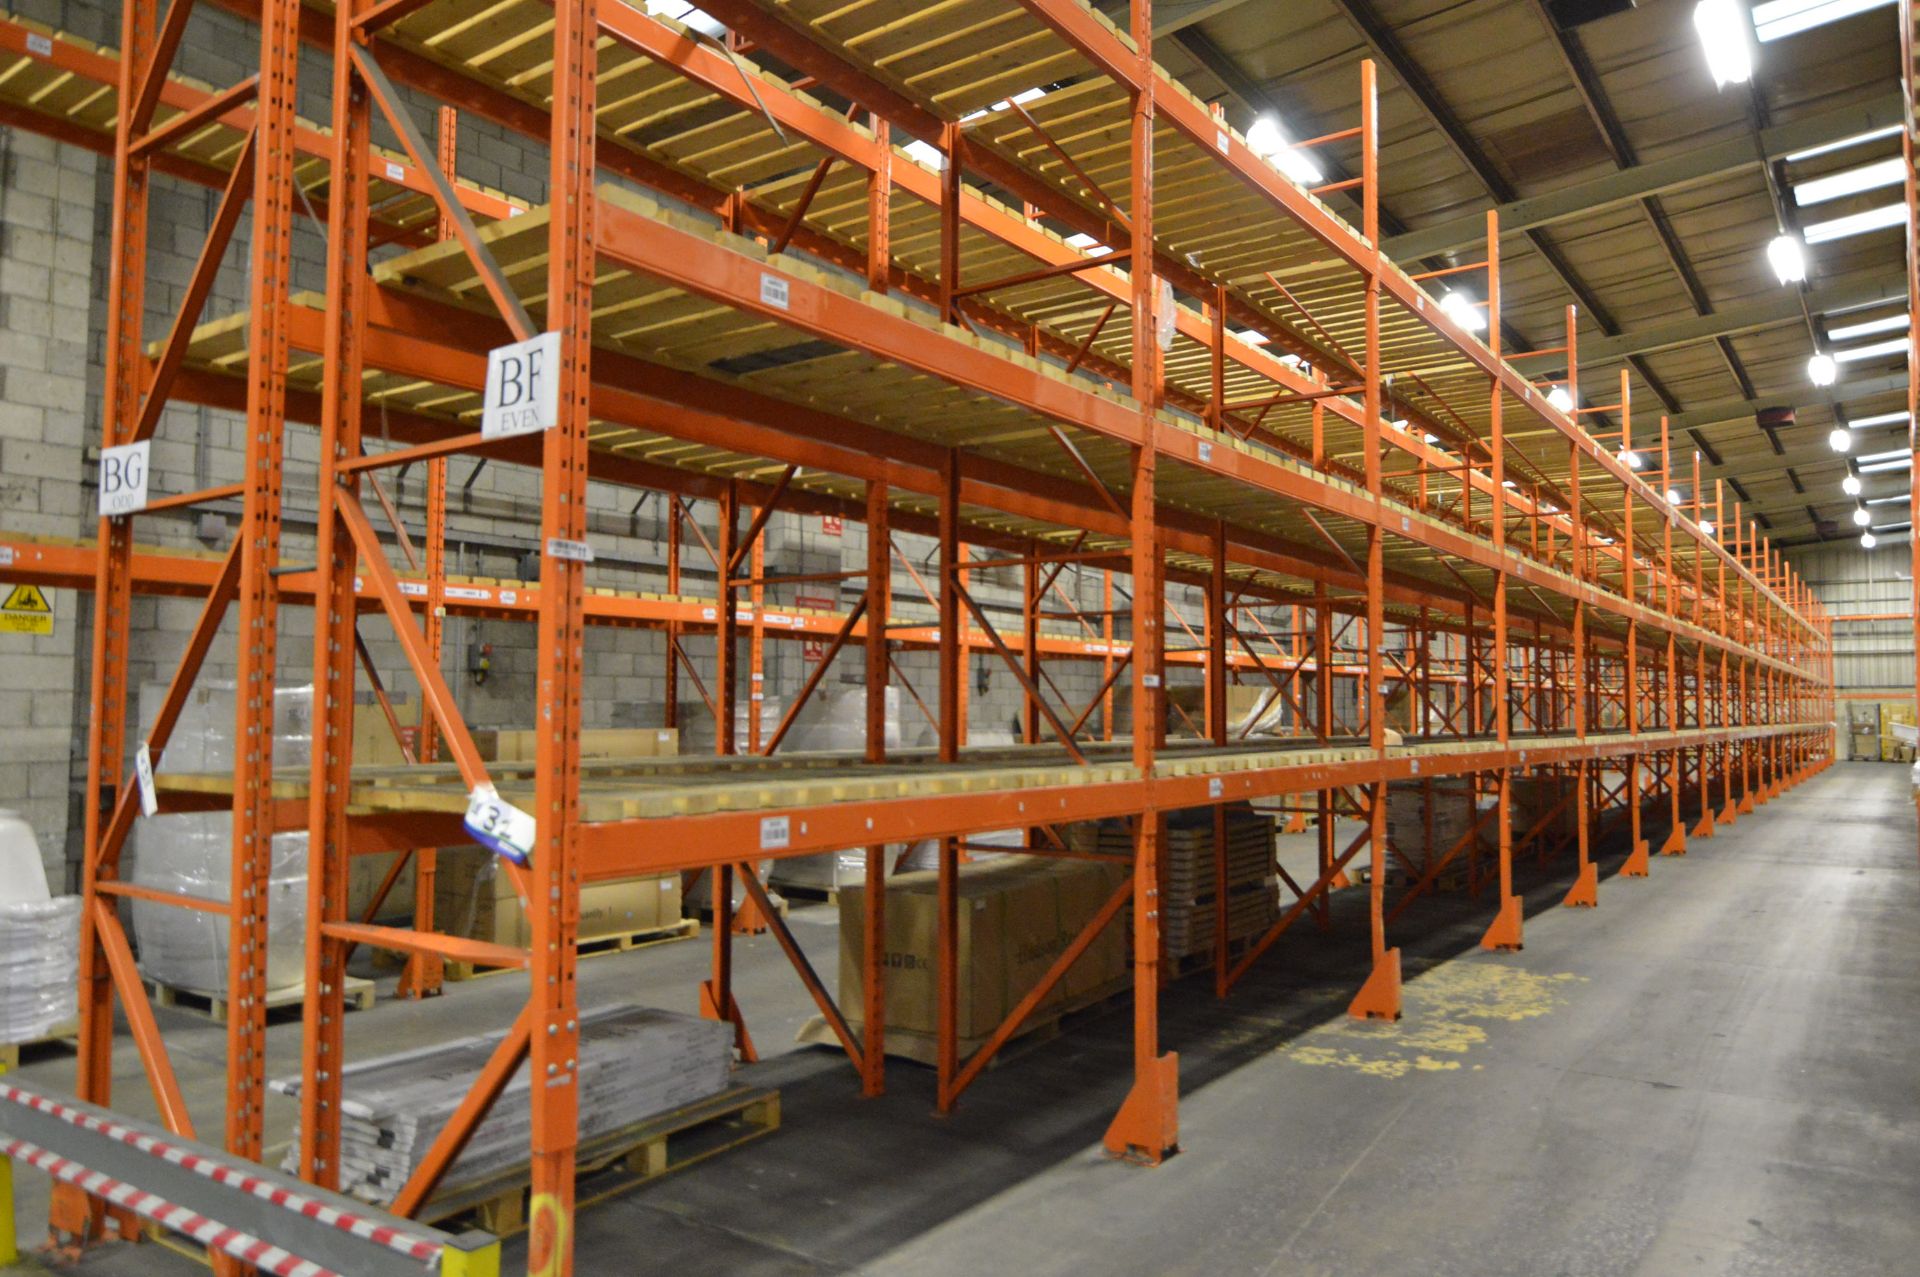 Redirack SD 2.50 DOUBLE SIDED 38 BAY THREE TIER PALLET RACK, each run approx. 52m x 1m x 5.4m - Image 4 of 4